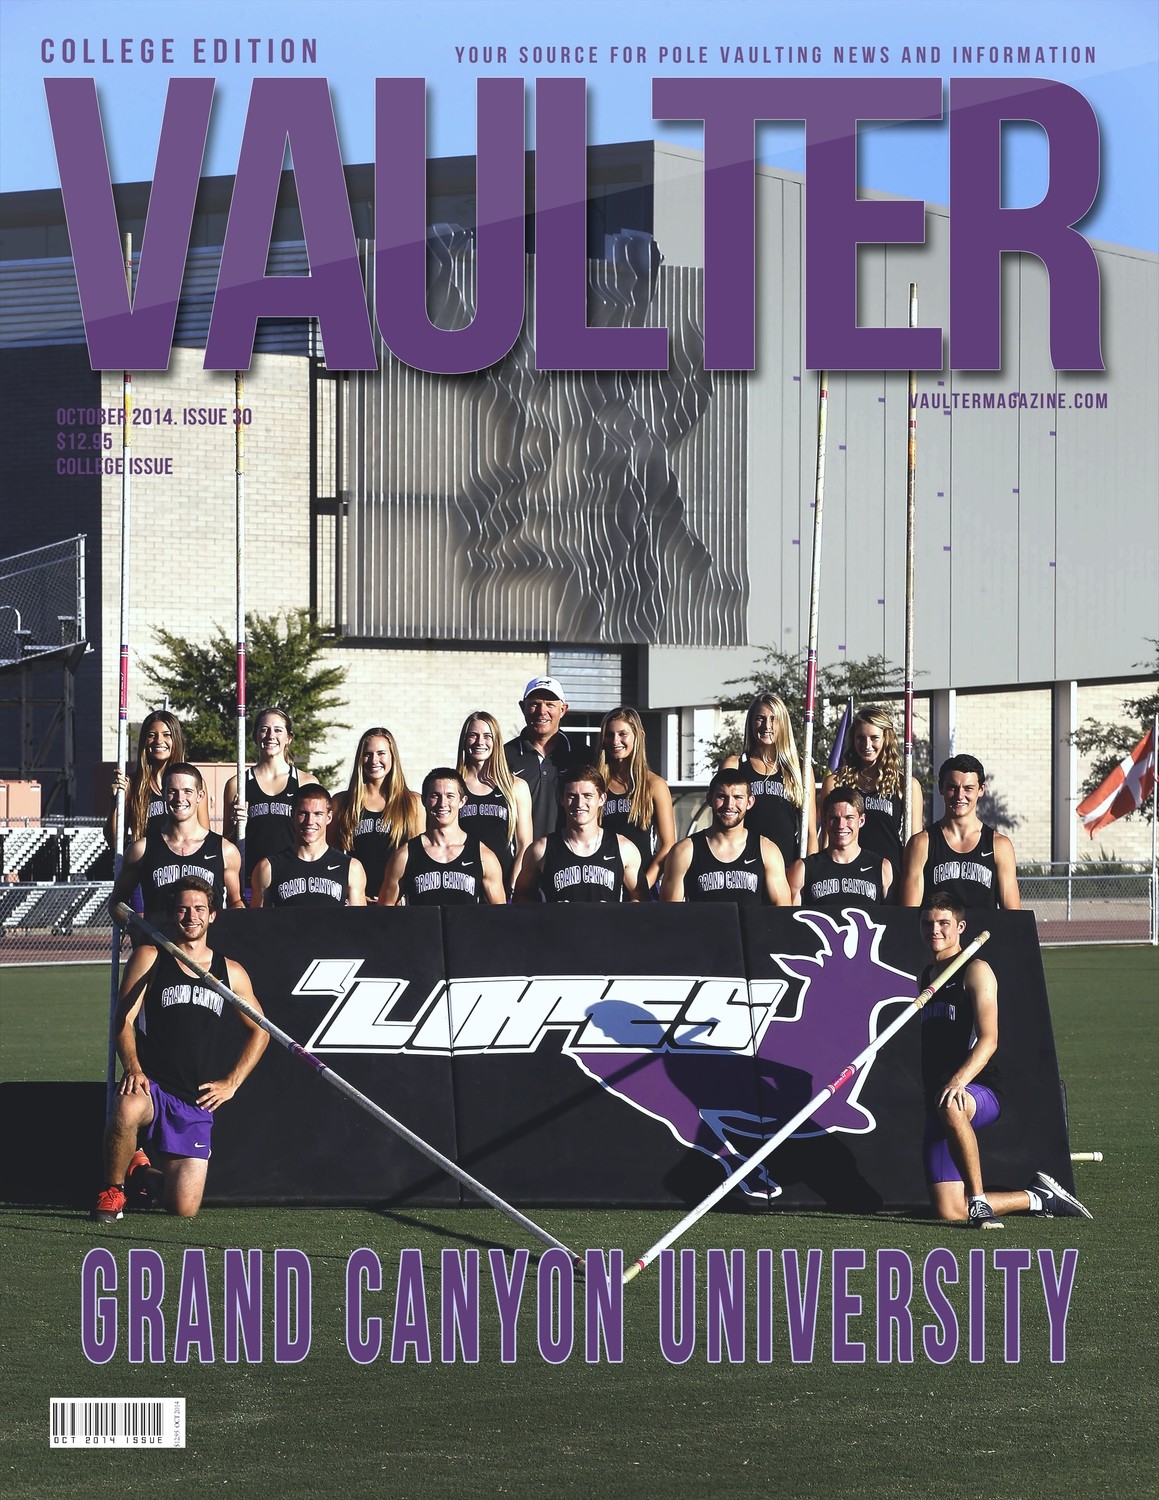 Buy a Grand Canyon University Magazine - Get Poster for $20 - That's $5 Off